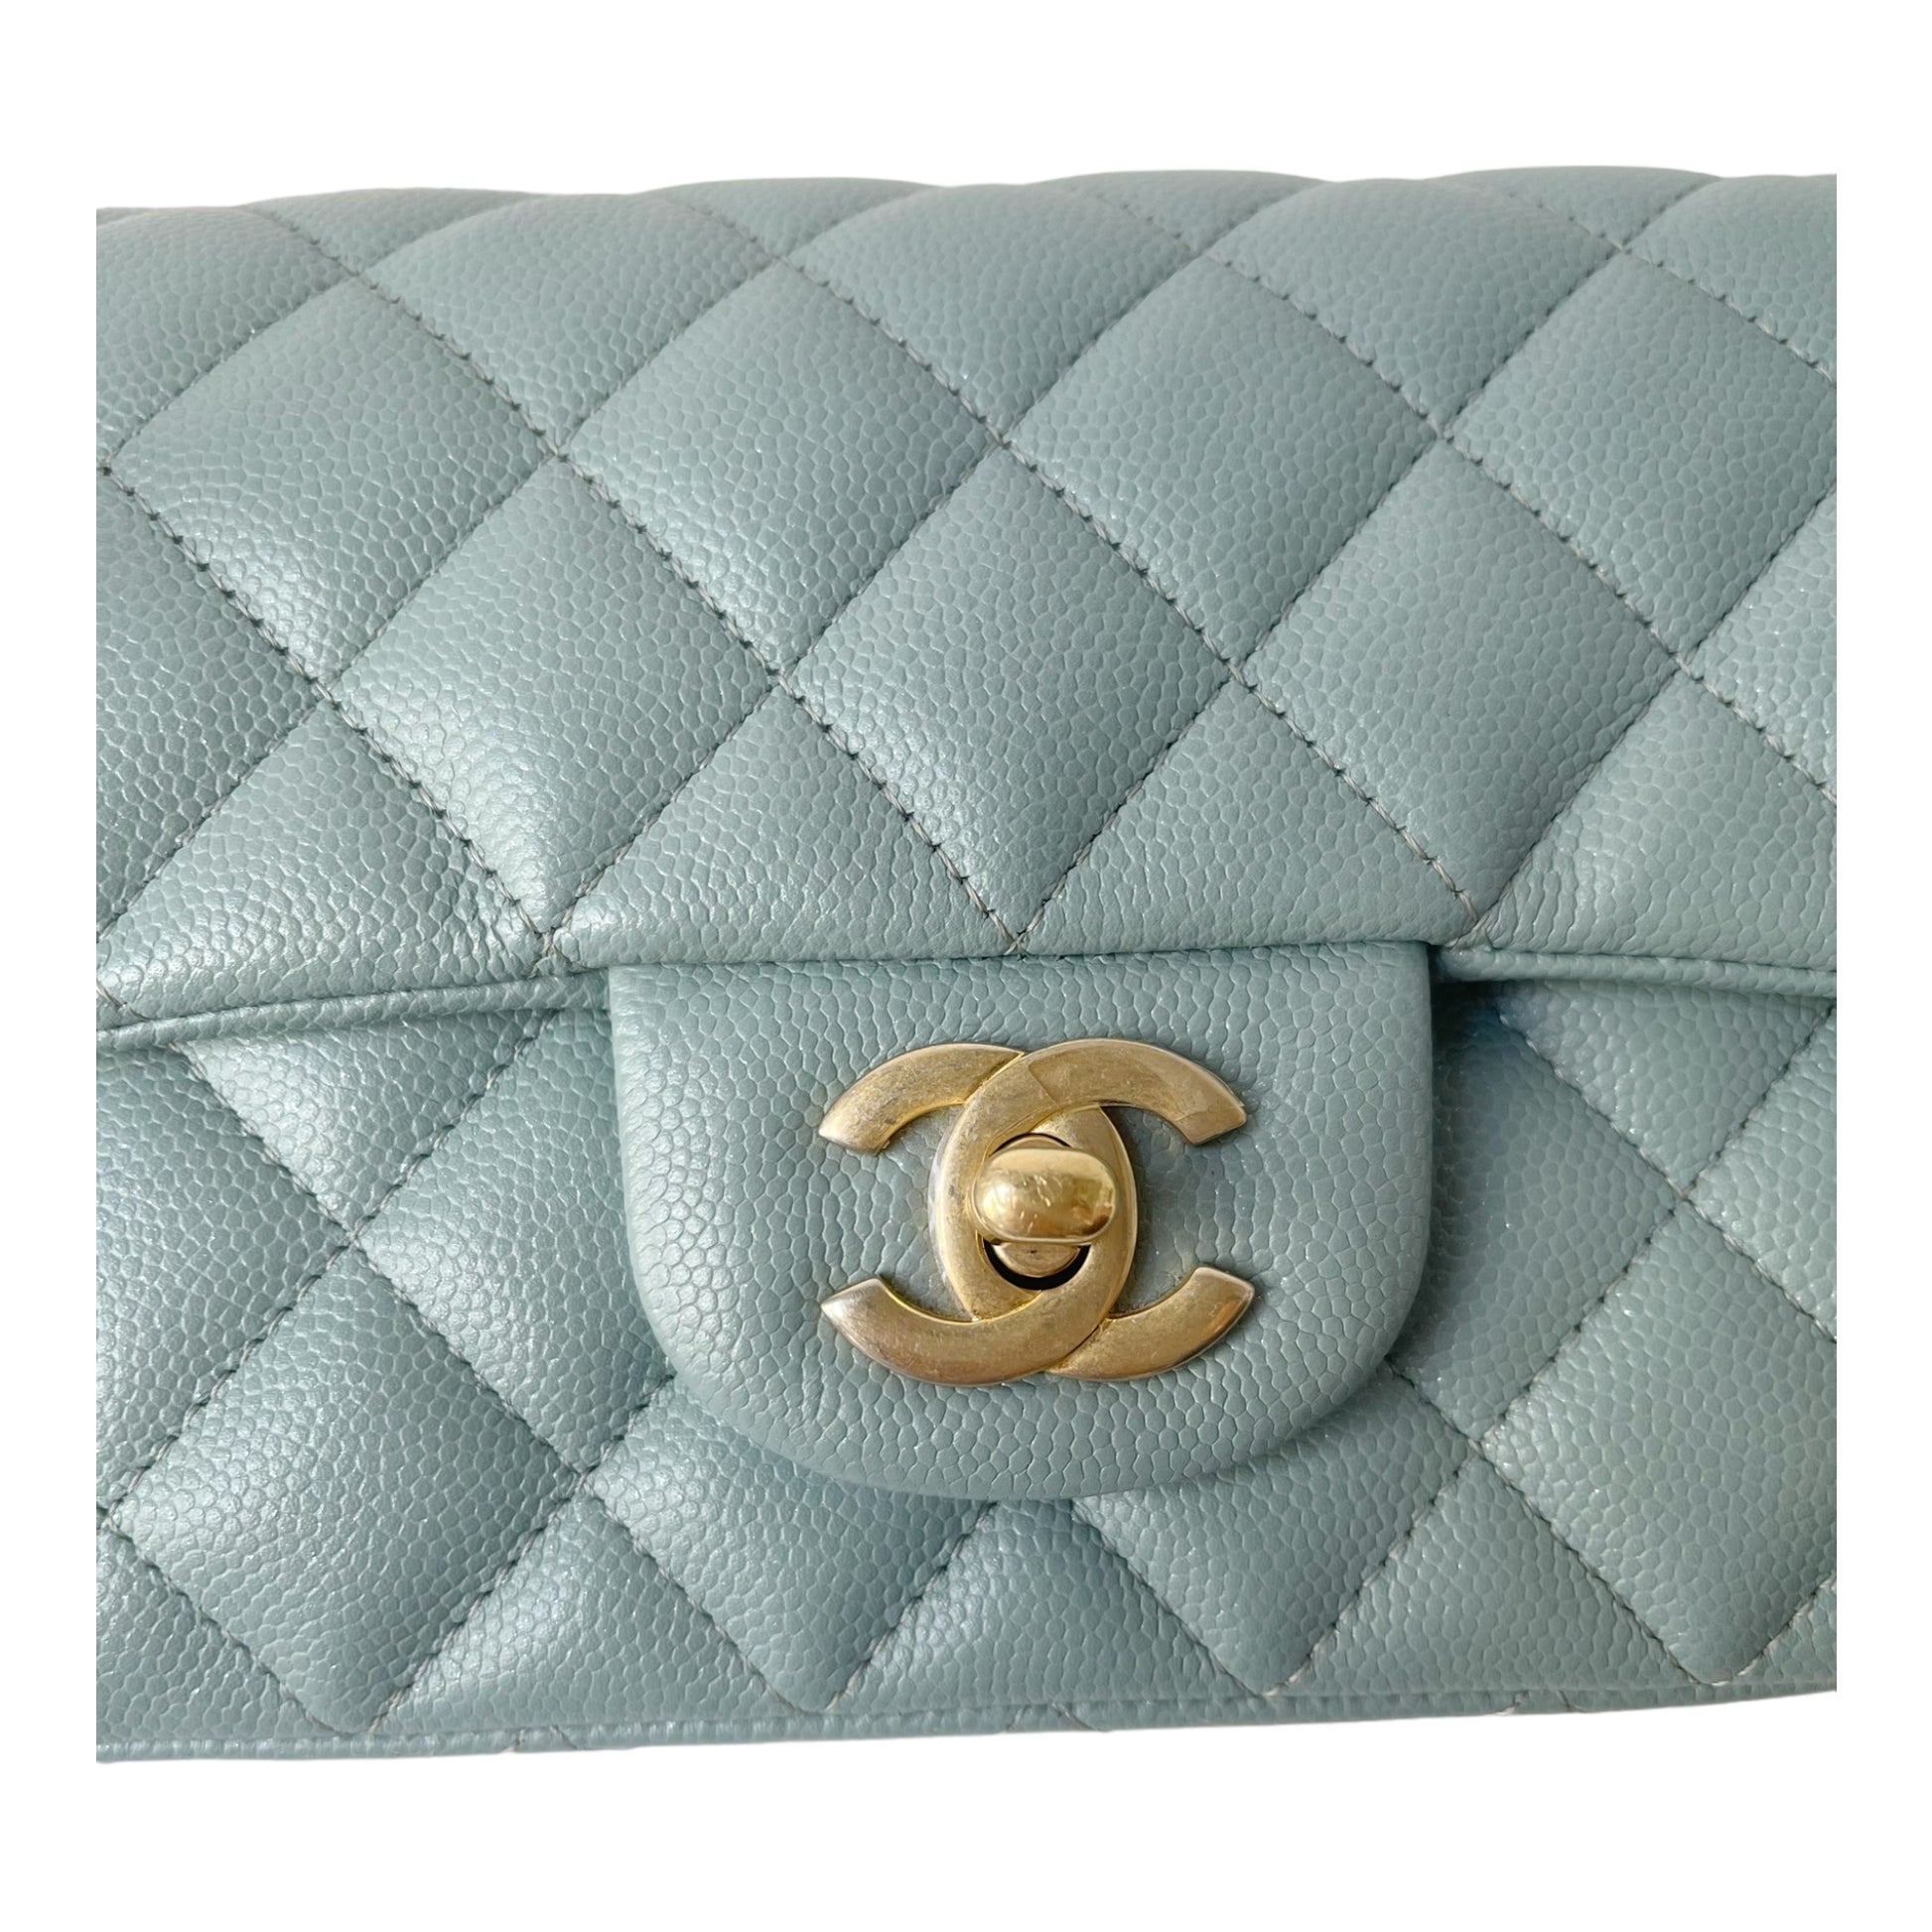 Chanel Gold Quilted Caviar Medium Double Flap Bag Gold Hardware